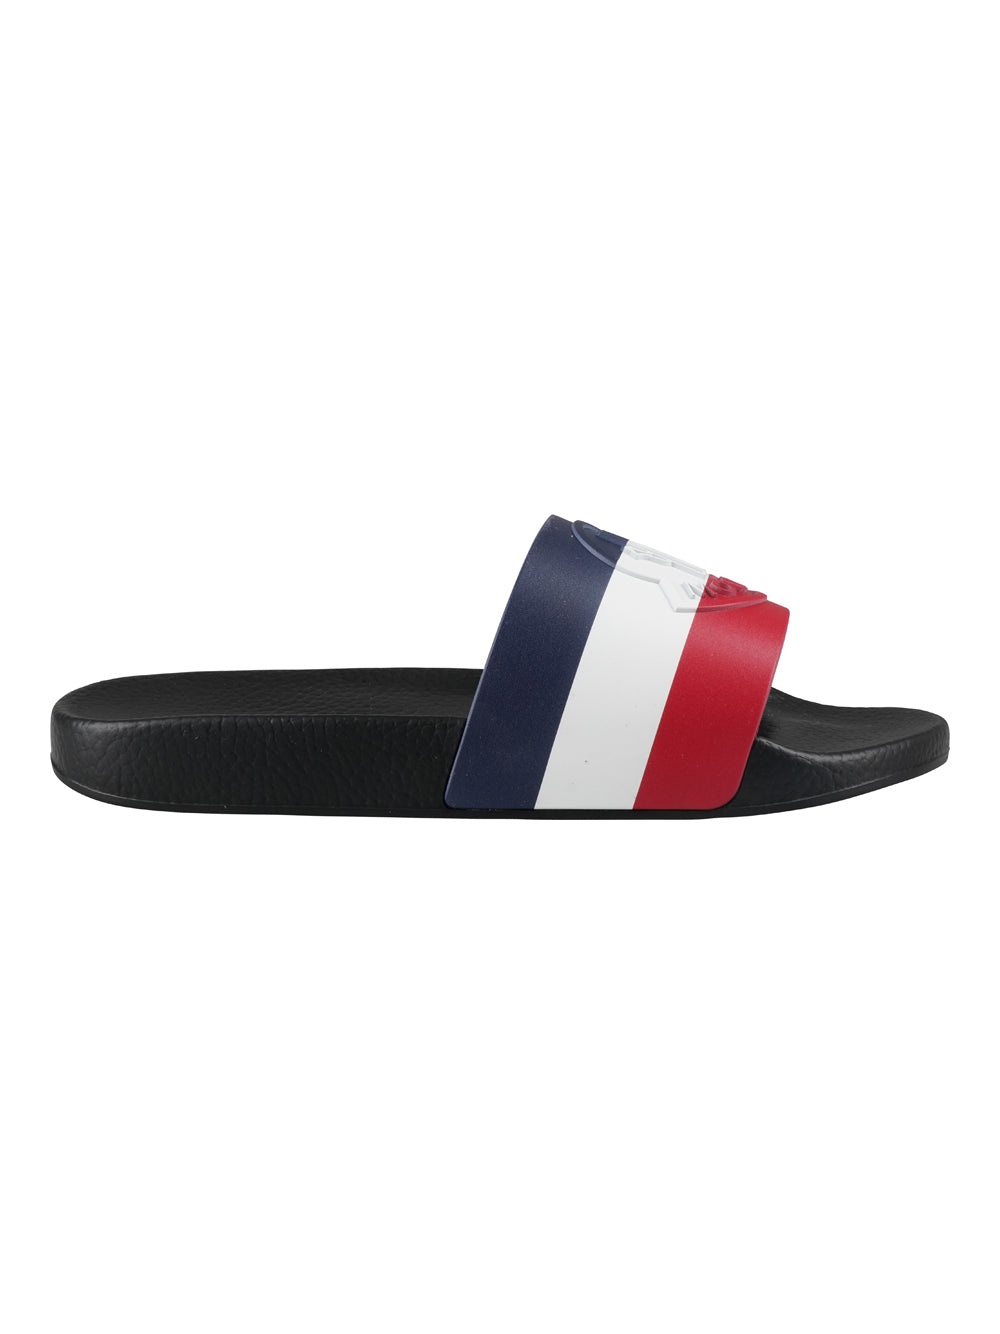 MONCLER MULTICOLOR SLIPPERS - 16